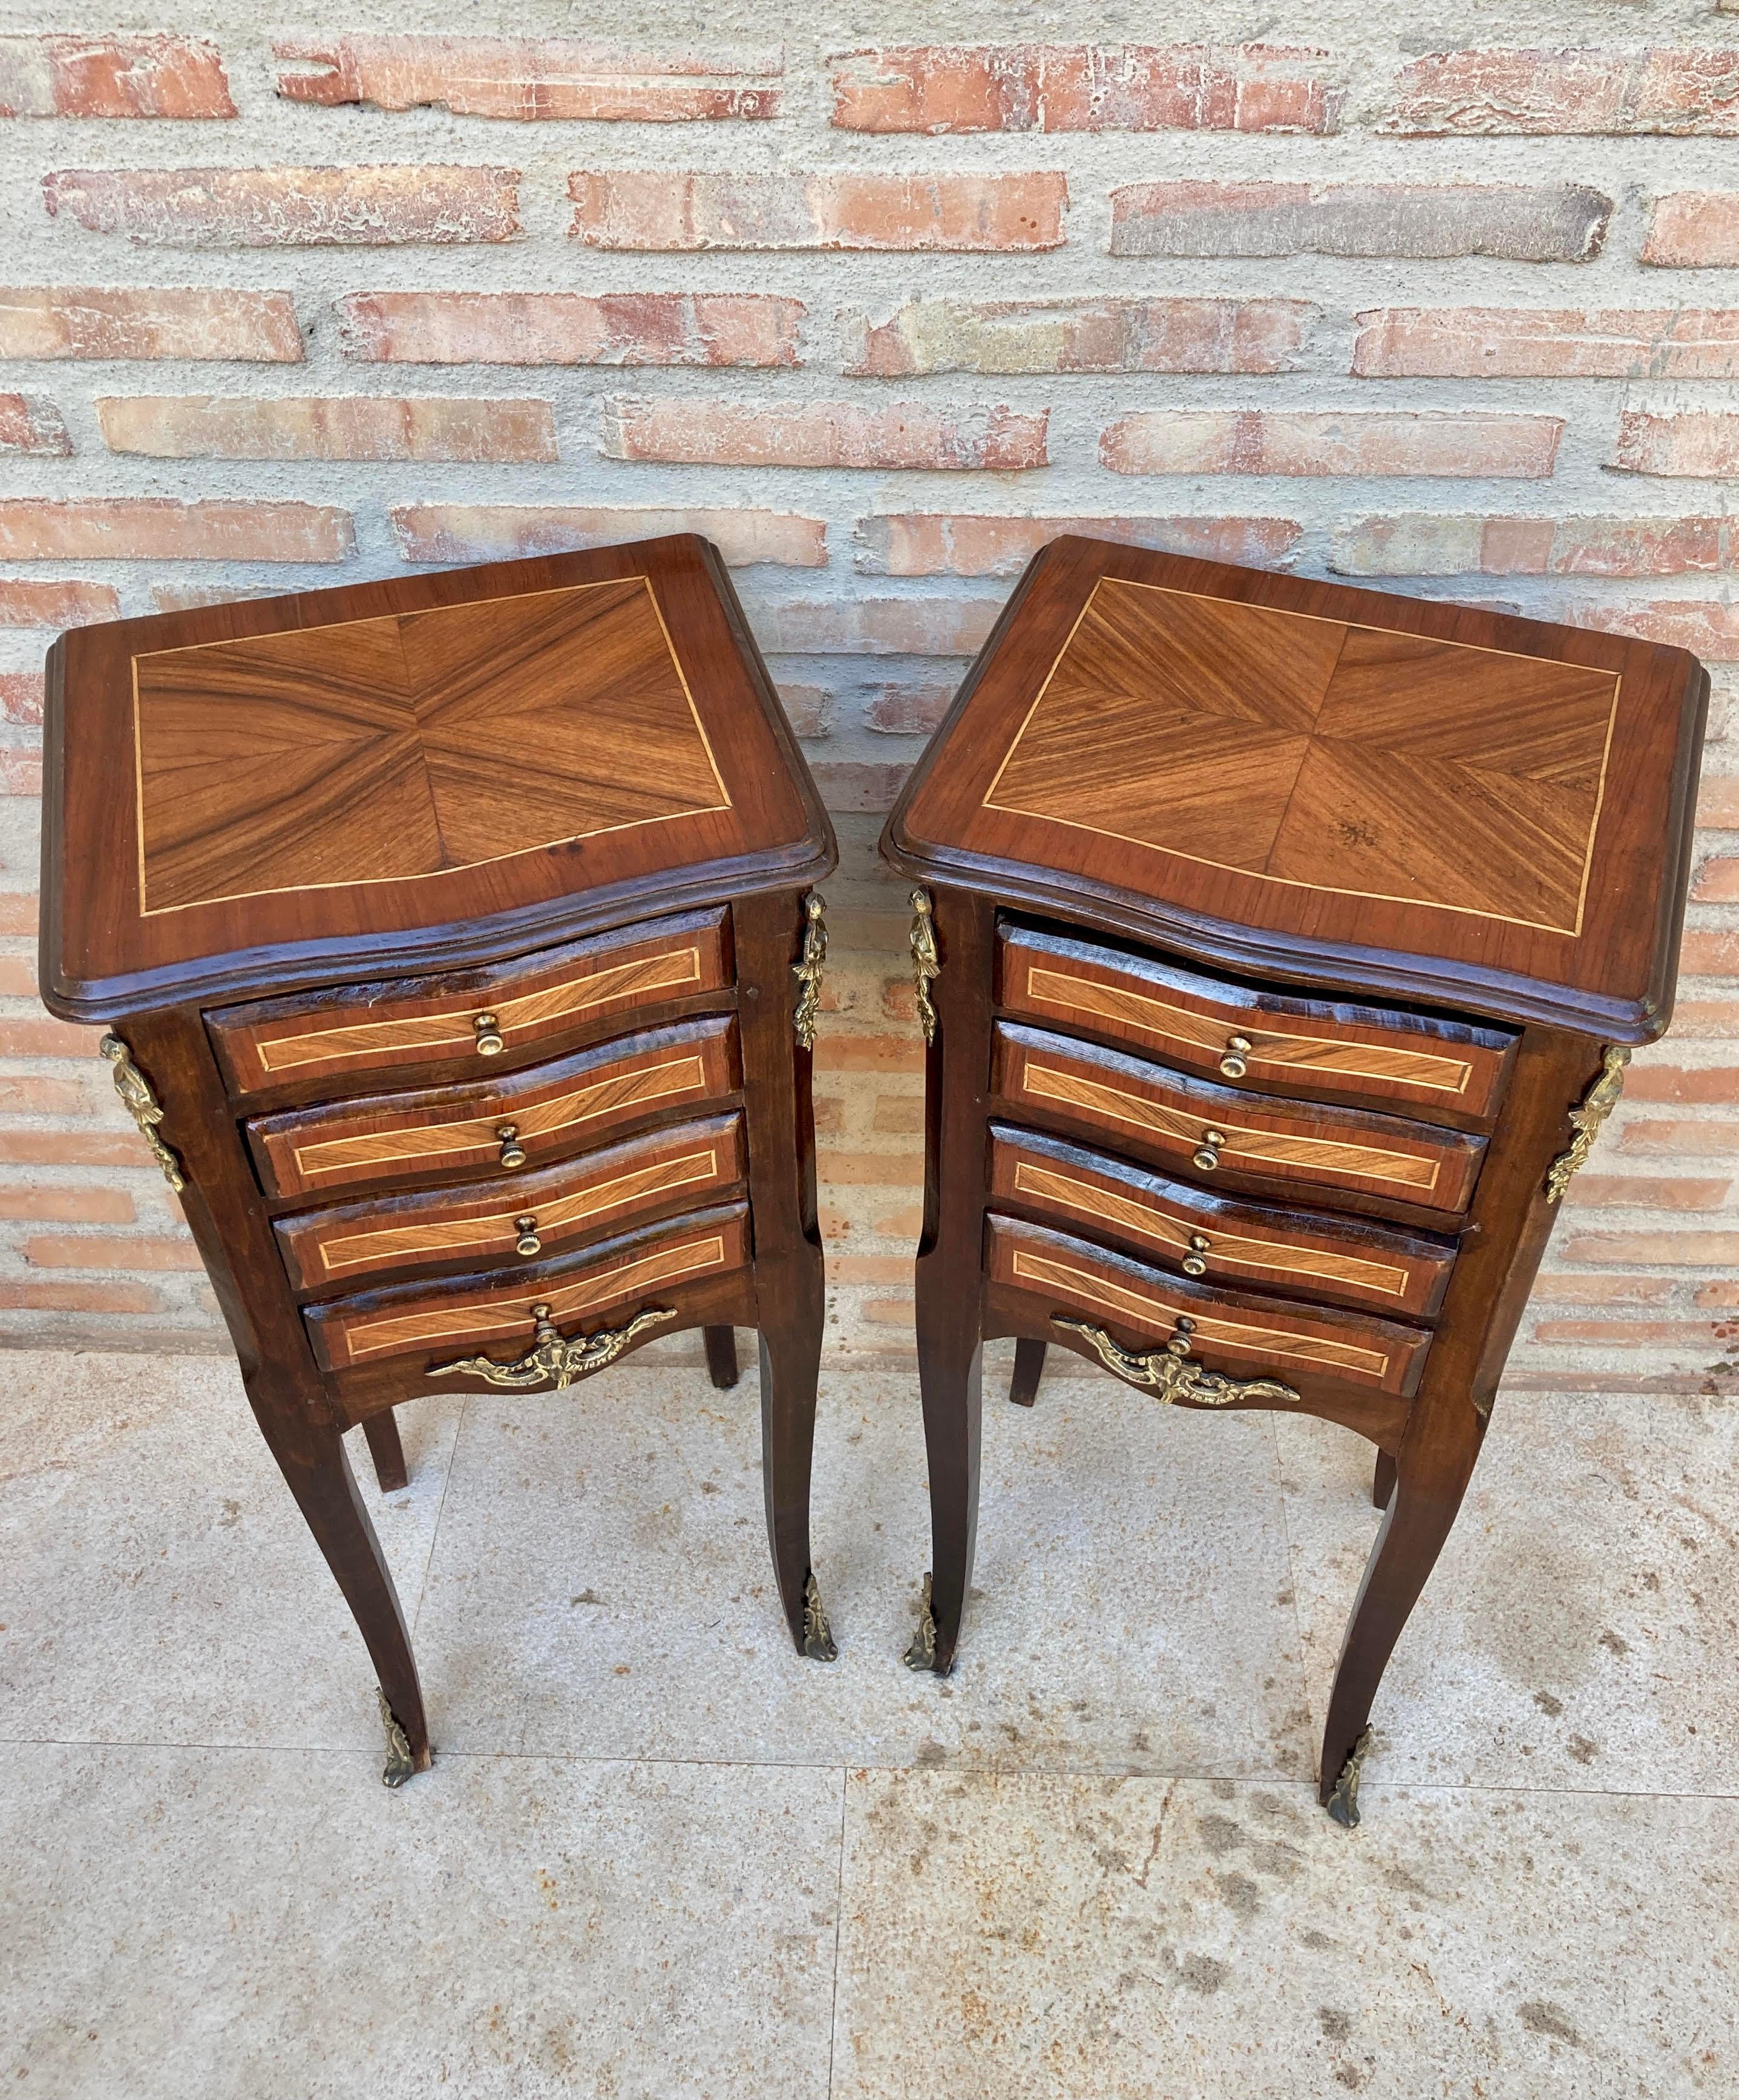 Pair of French Louis XV Style Tulipwood Veneer Bedside Tables or Nightstands In Good Condition For Sale In Miami, FL